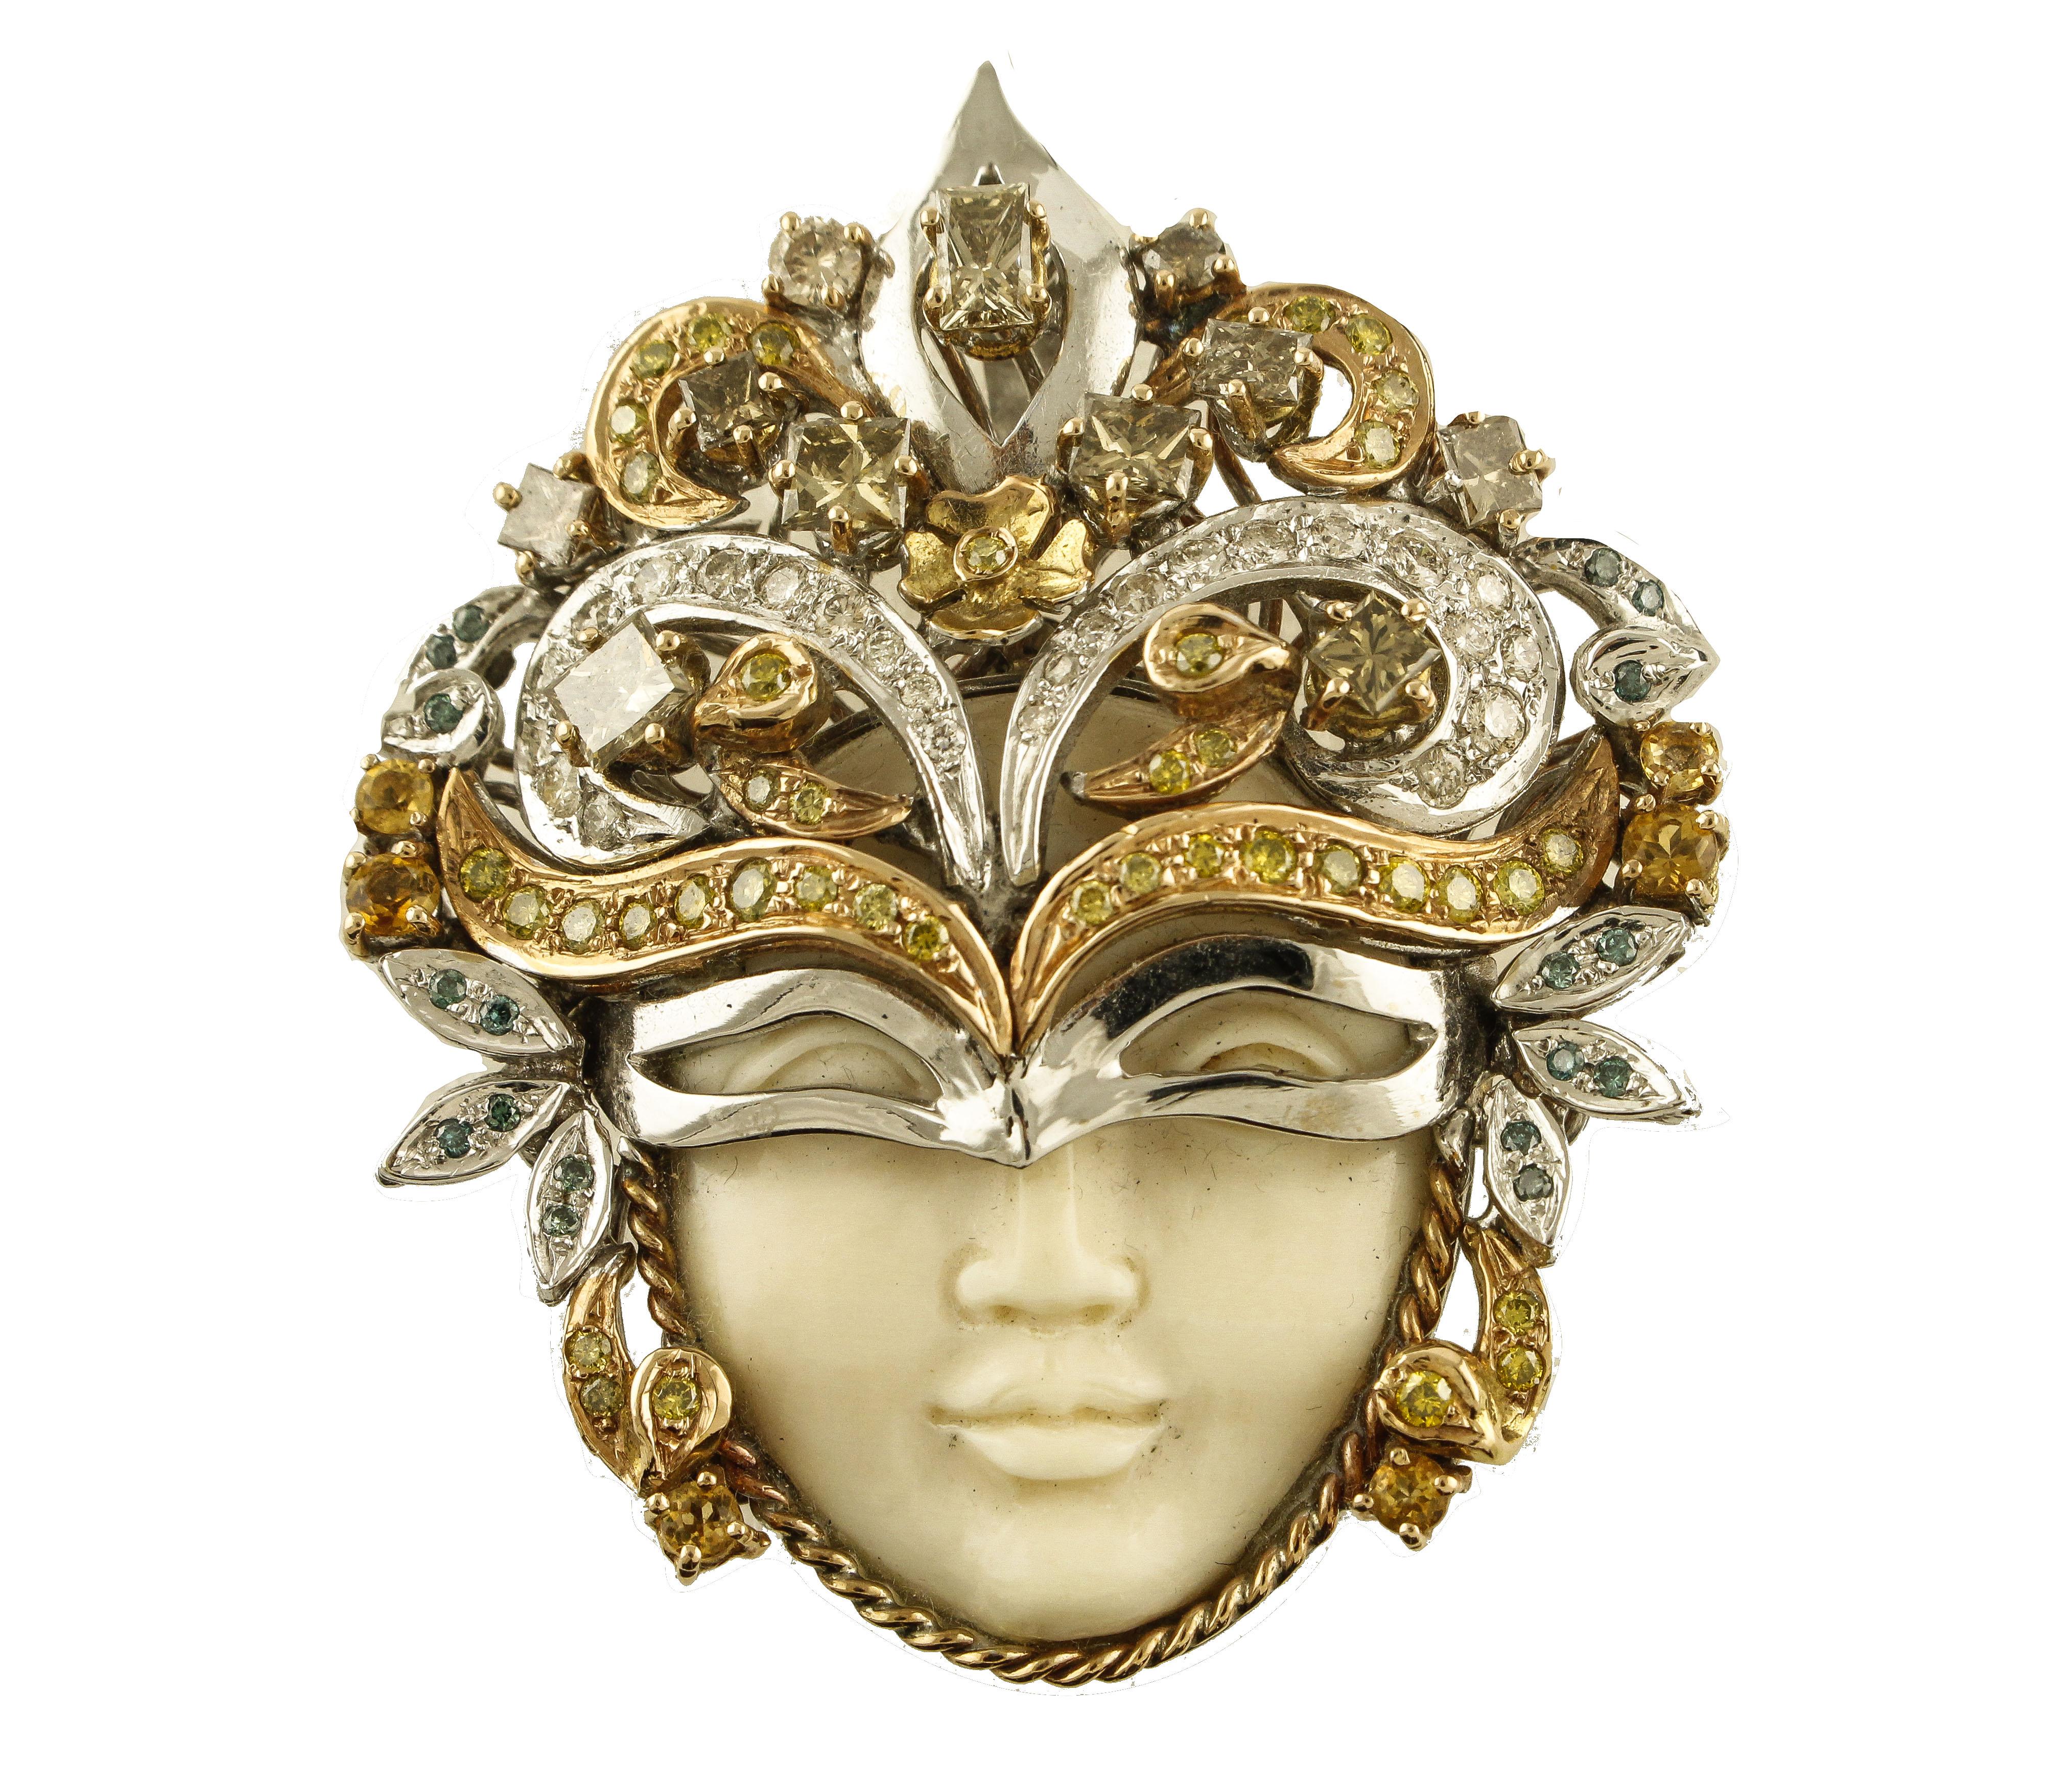 Beautiful Venetian mask, mounted in 14 kt rose and white gold, composed of a carved hard stone face, the whole mask is embellished with blue, brown and yellow fancy diamonds,and yellow topazes.

Material and weights:
- Diamonds 4.18 kt
- Topaz 0.45